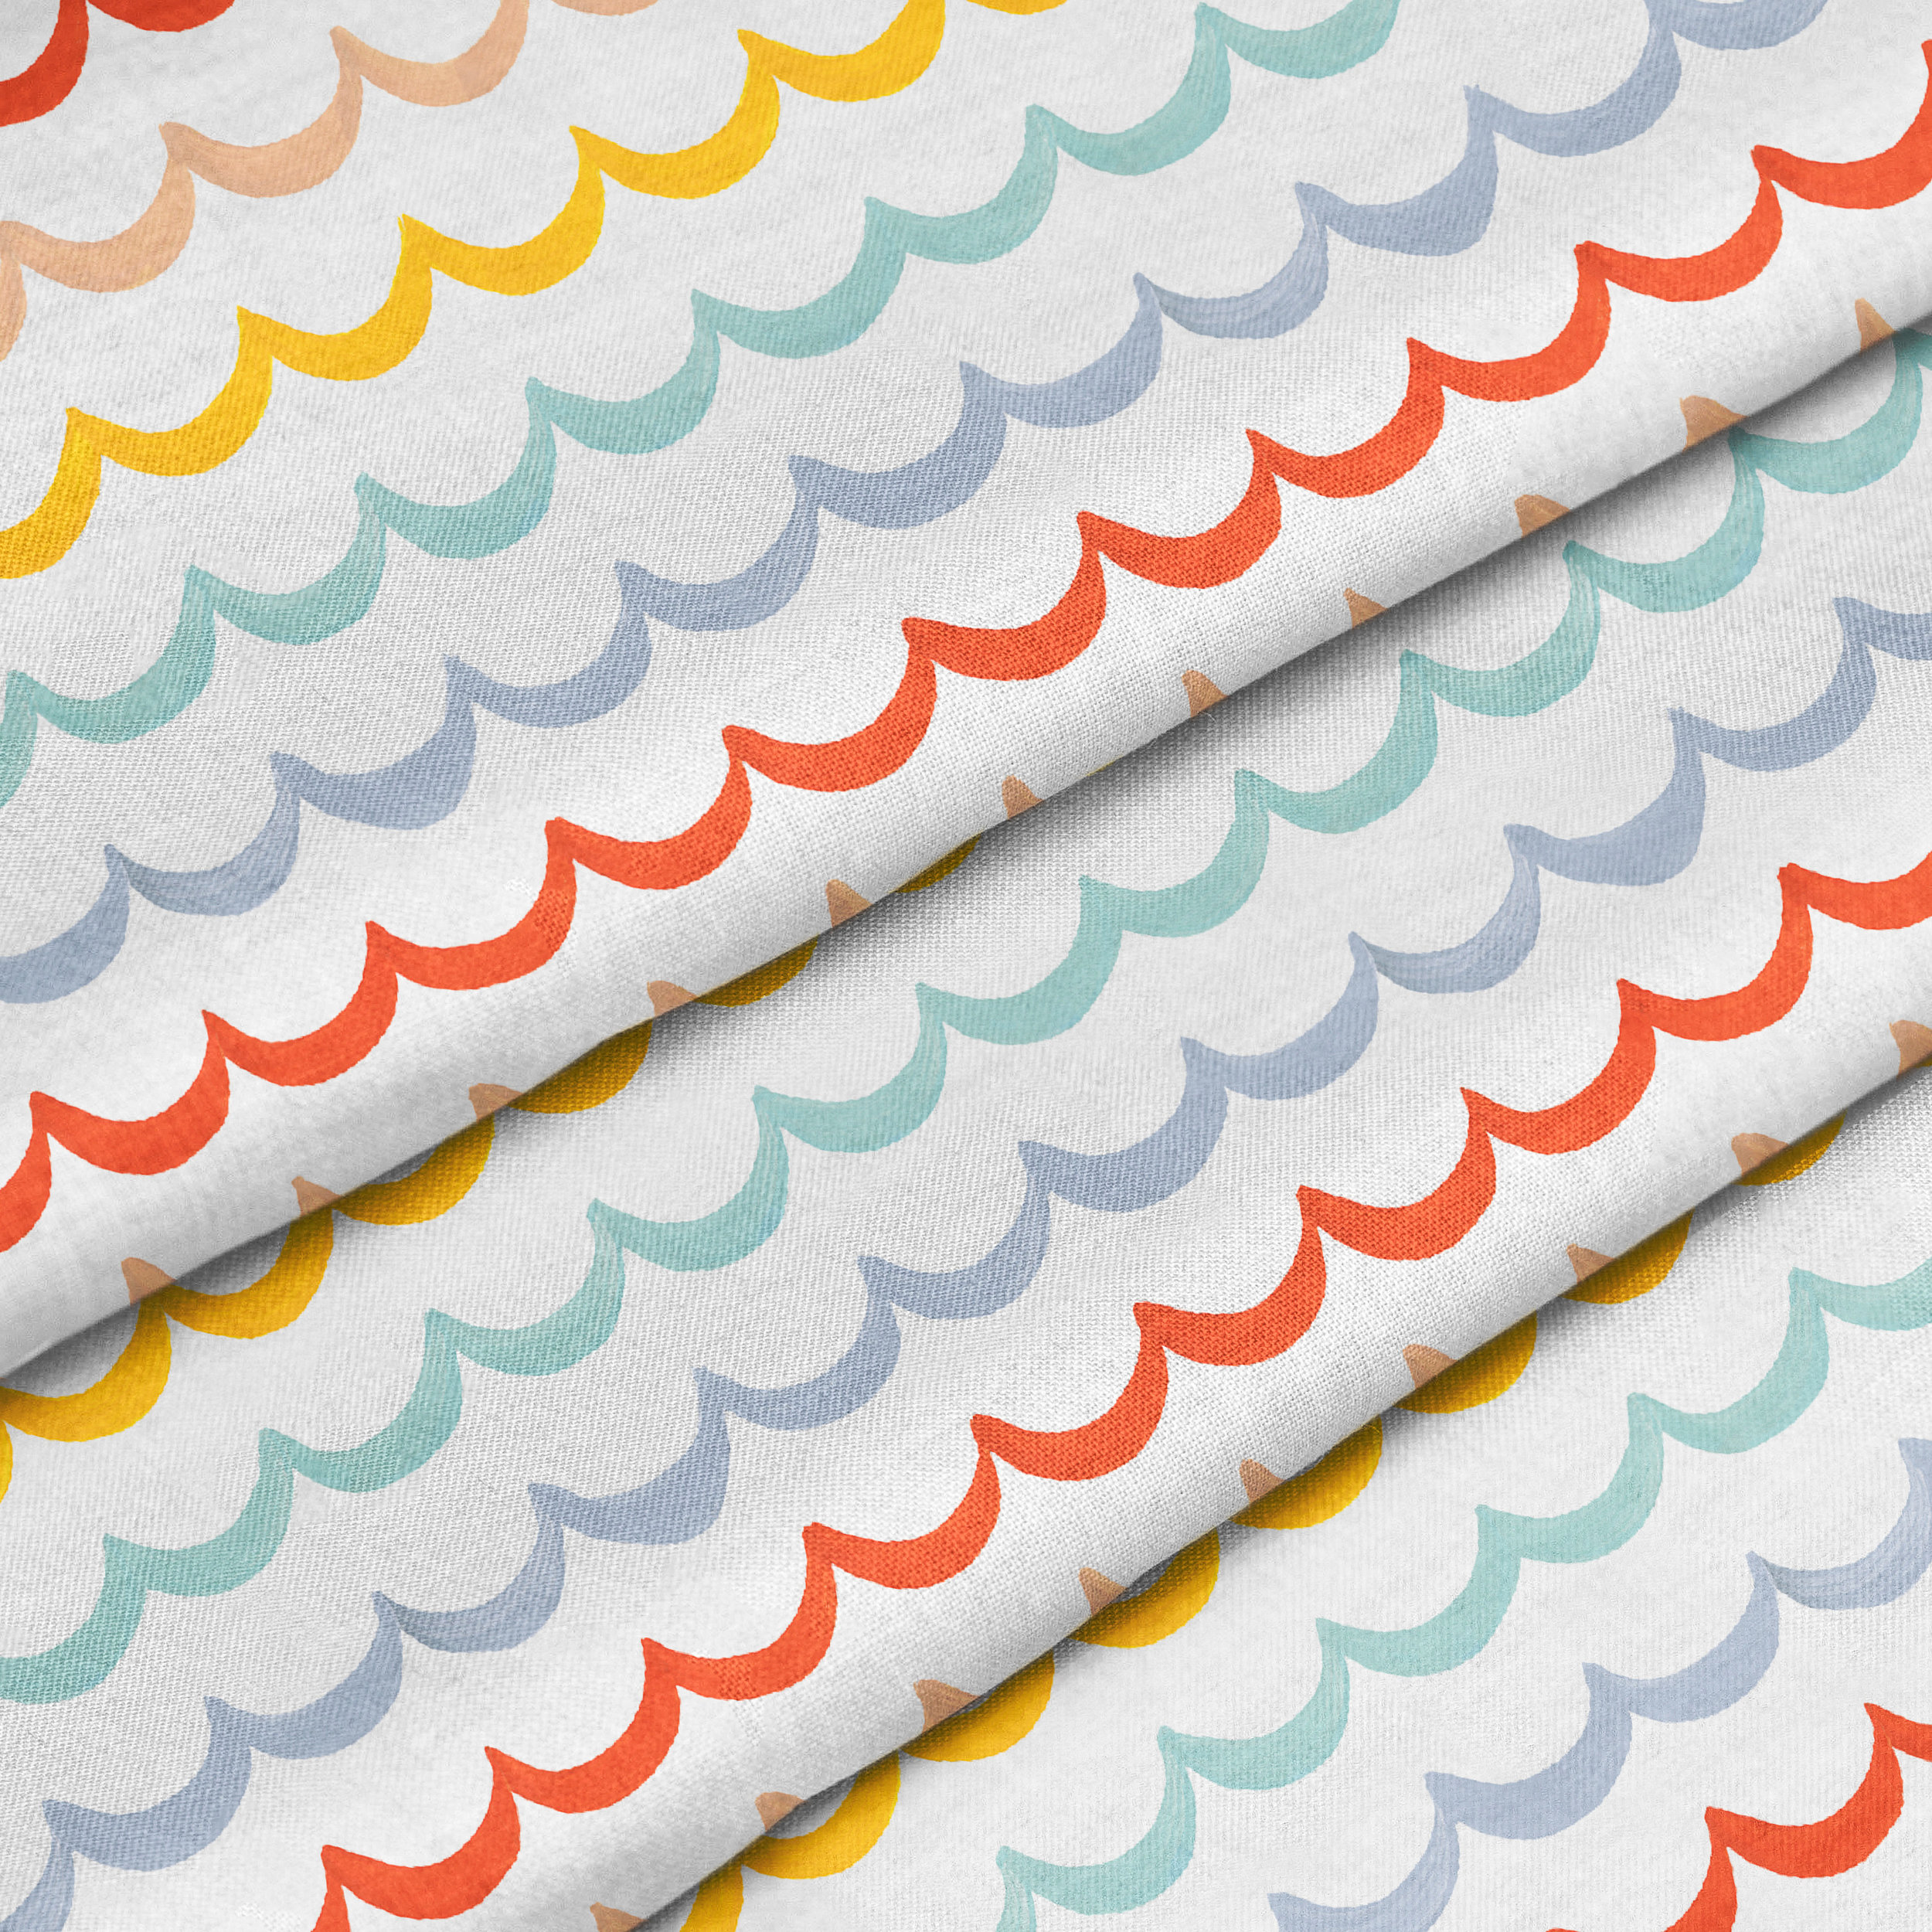 Ocean Waves fabric in coral, blush, blue, yellow, and mint.